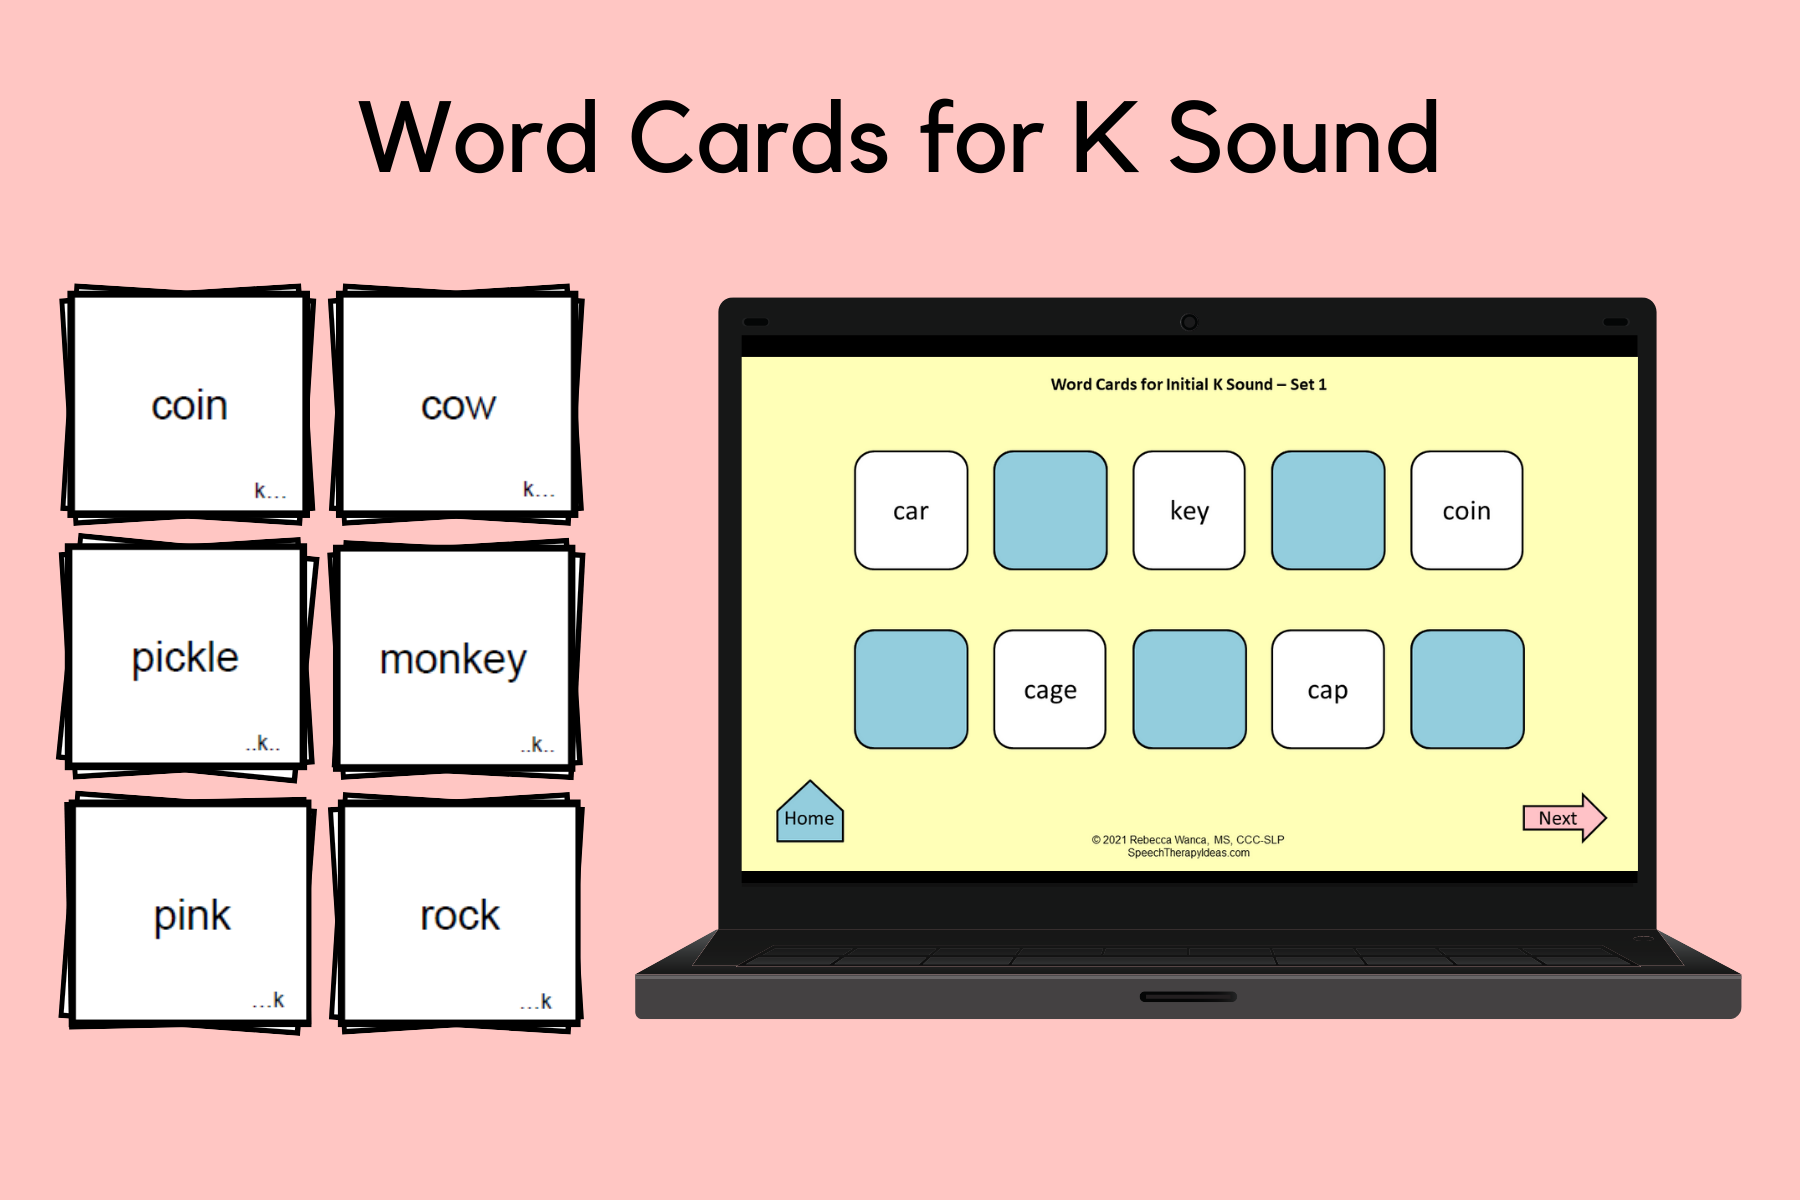 Word Cards for K Sound